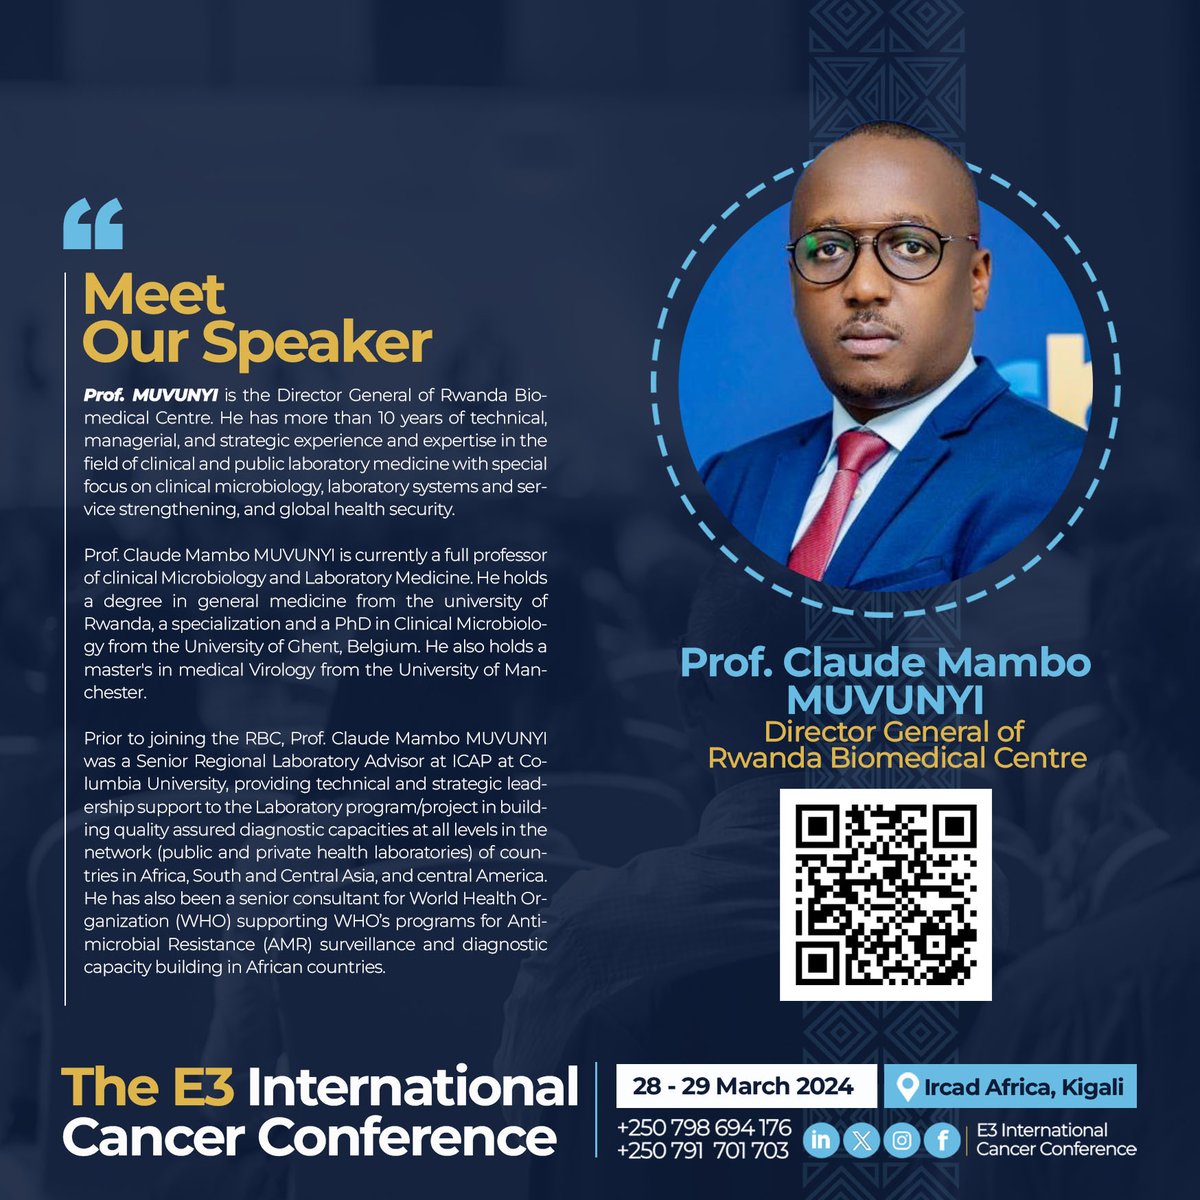 Our Director General Prof Dr Claude Muvunyi @CMuvunyi will be speaking at the E3 International #Cancer Conference on 28-29 March 2024 at IRCAD Africa.